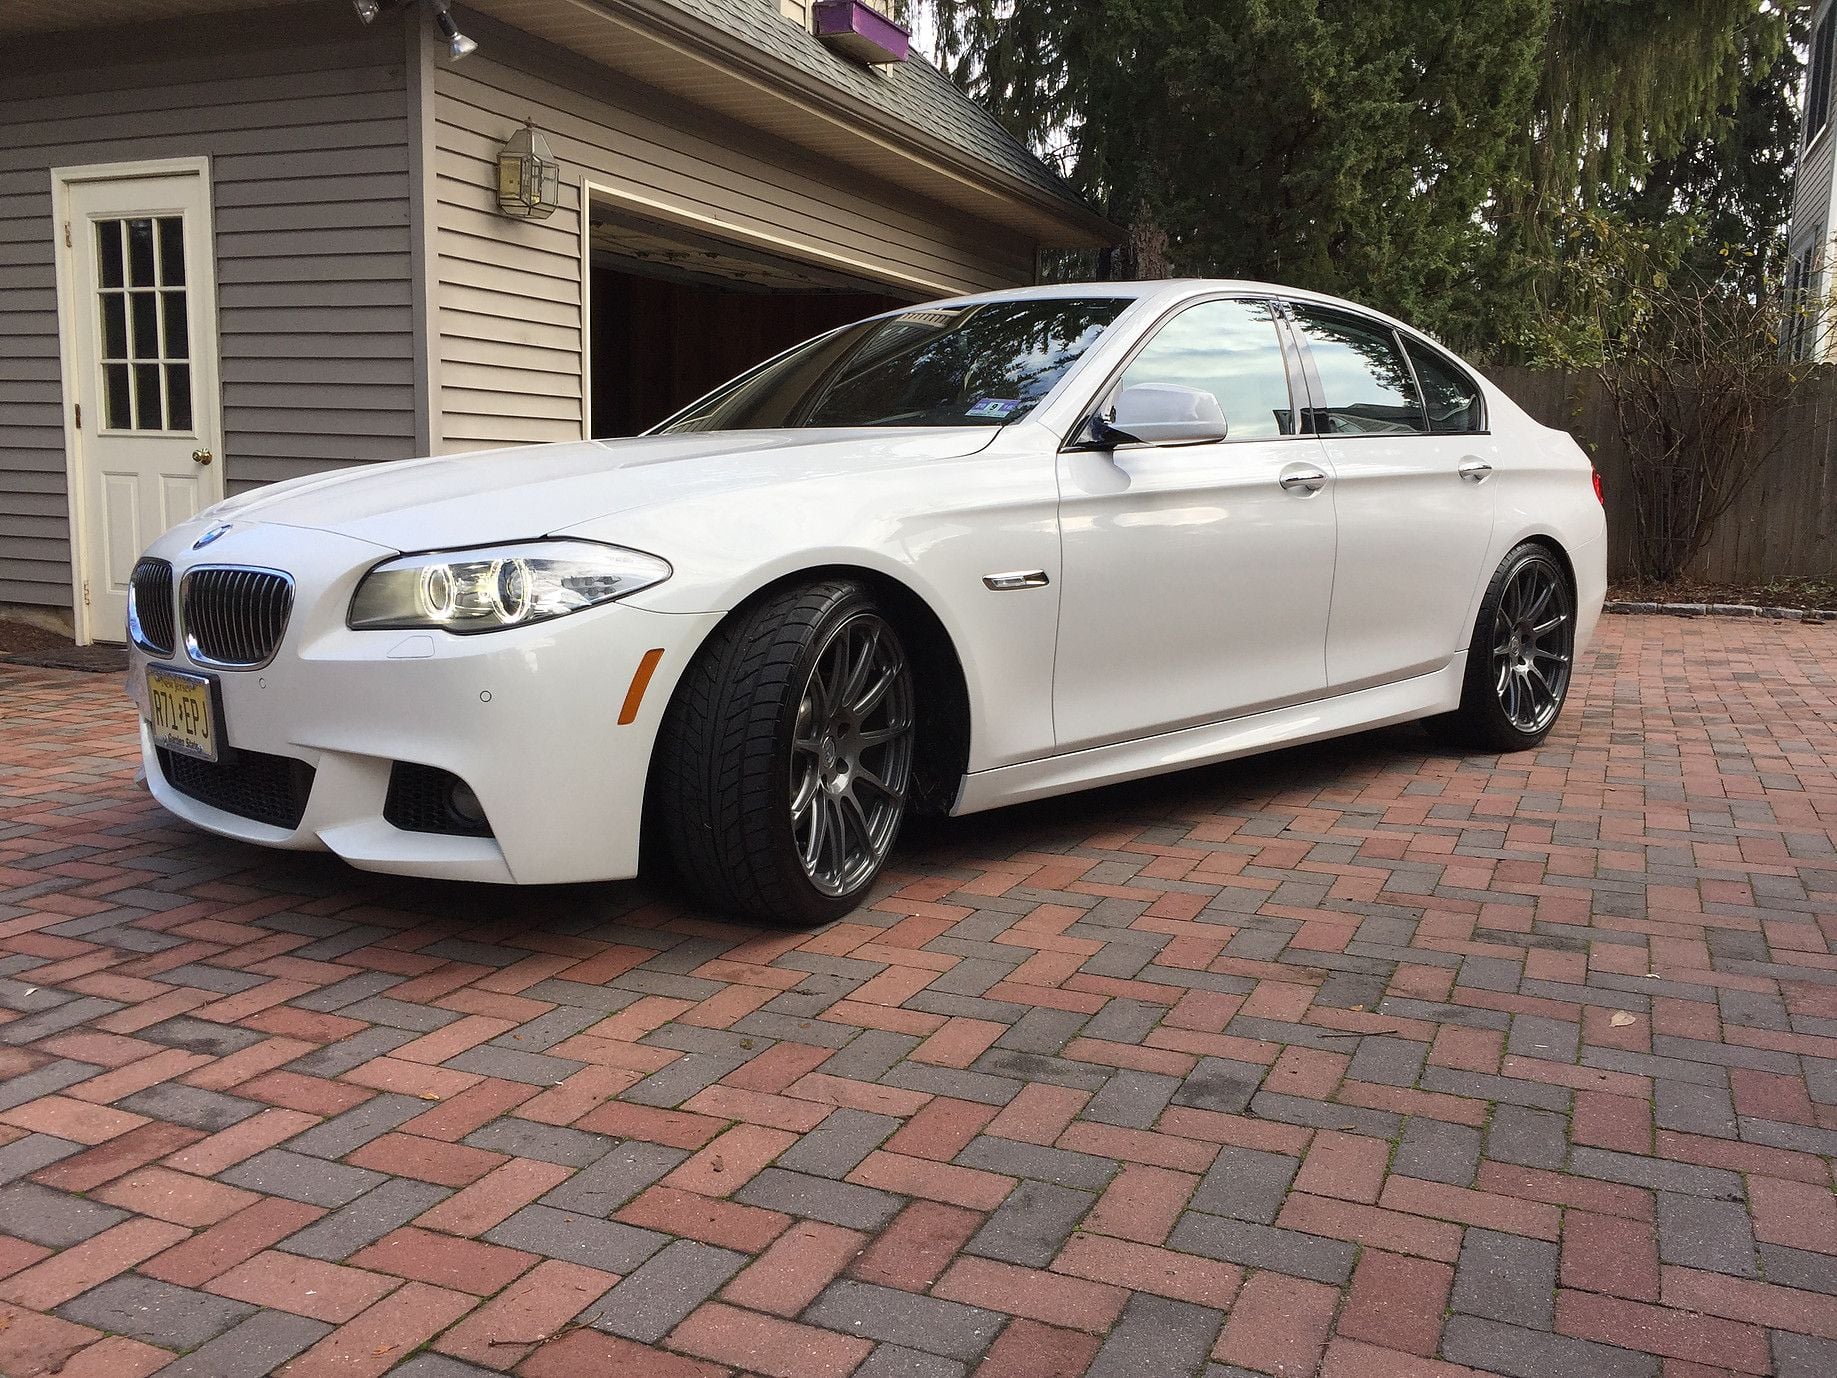 Wheels and Tires/Axles - HRE P43SC with Nitto Tires for BMW 5 series (F10) - Used - 2010 to 2019 BMW All Models - Bala Cynwyd, PA 19004, United States